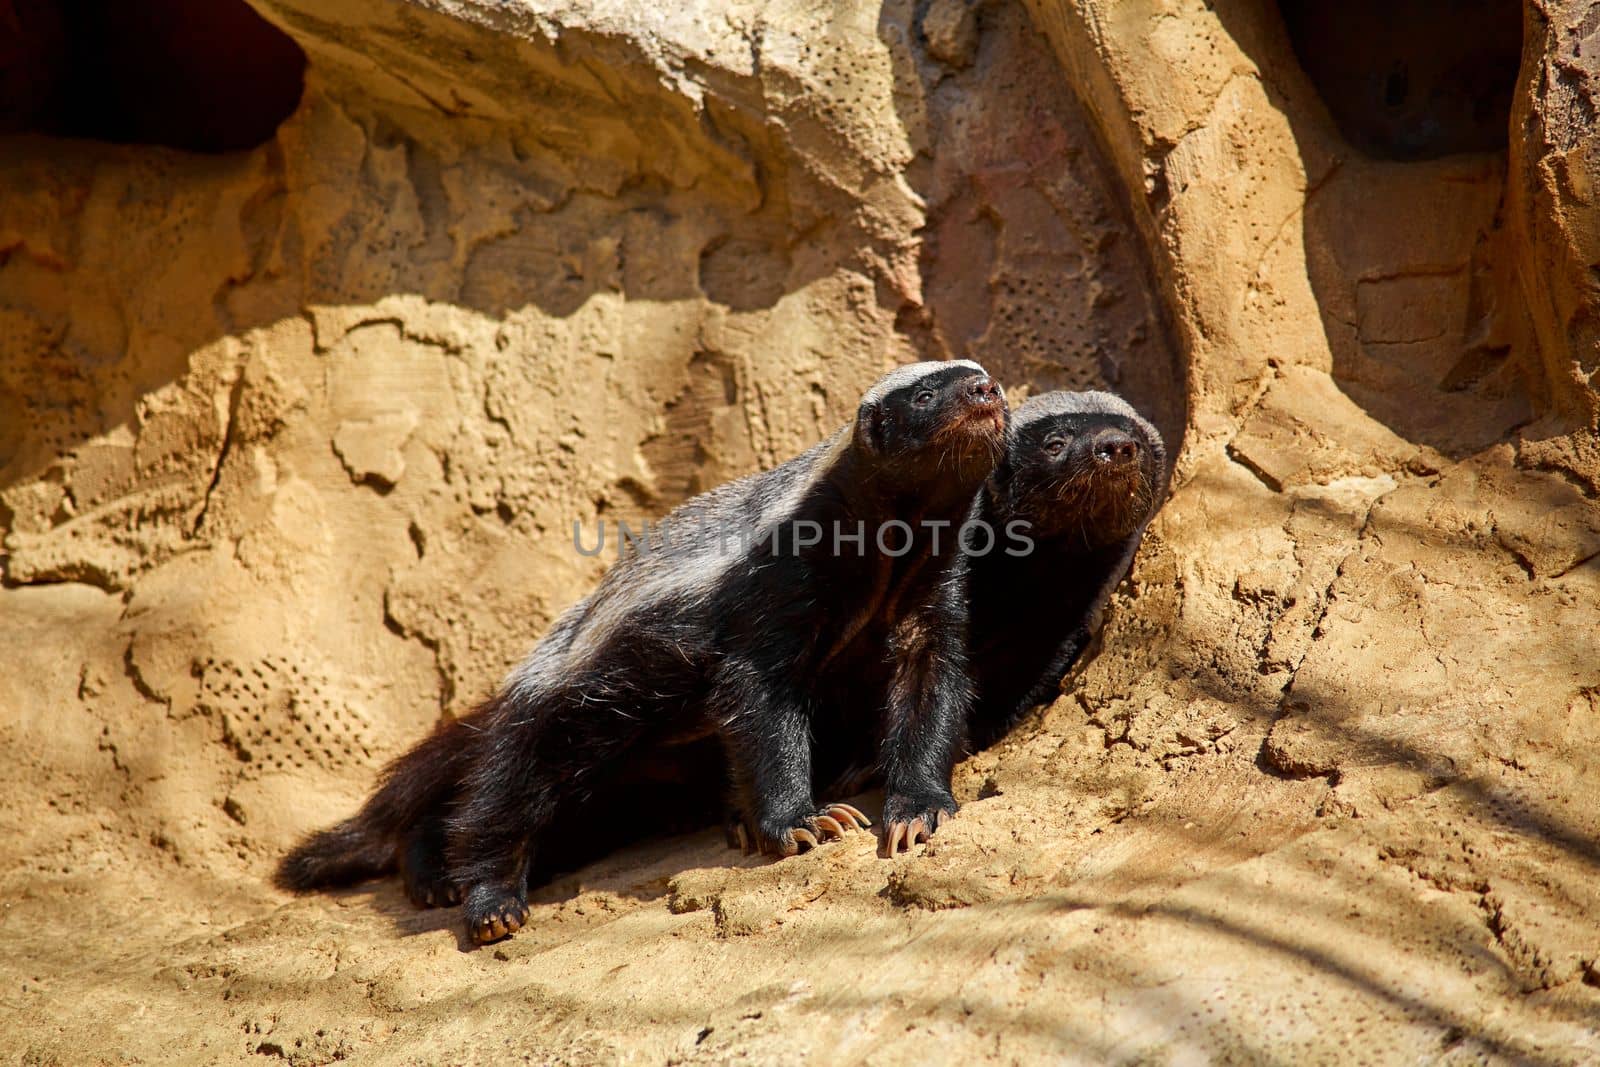 The honey badger basks in the sun on a stone at the zoo by Try_my_best